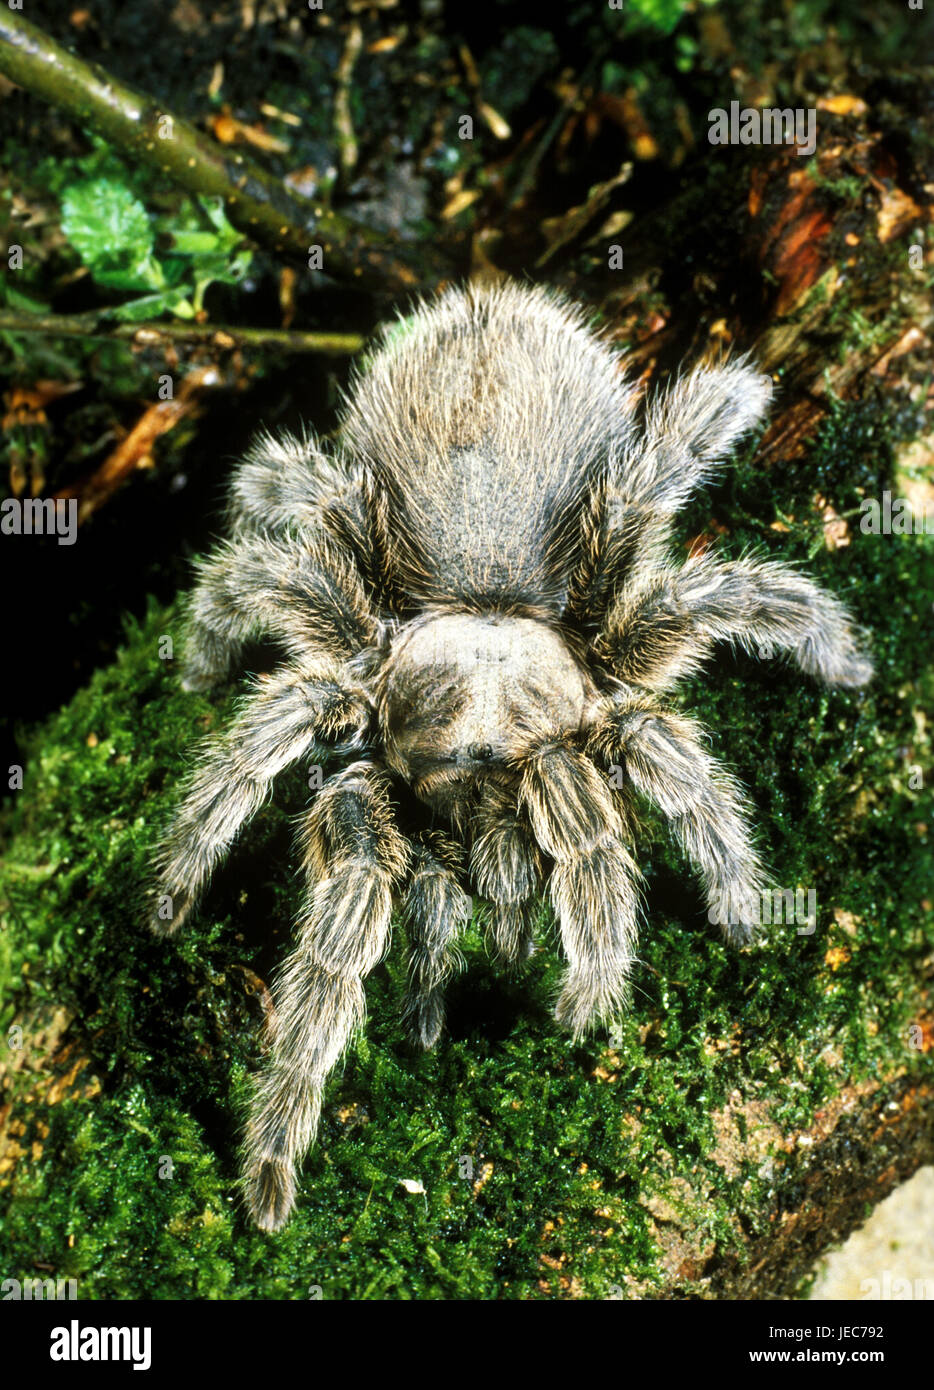 Spider, Theraphosa sp., in the moss, Stock Photo